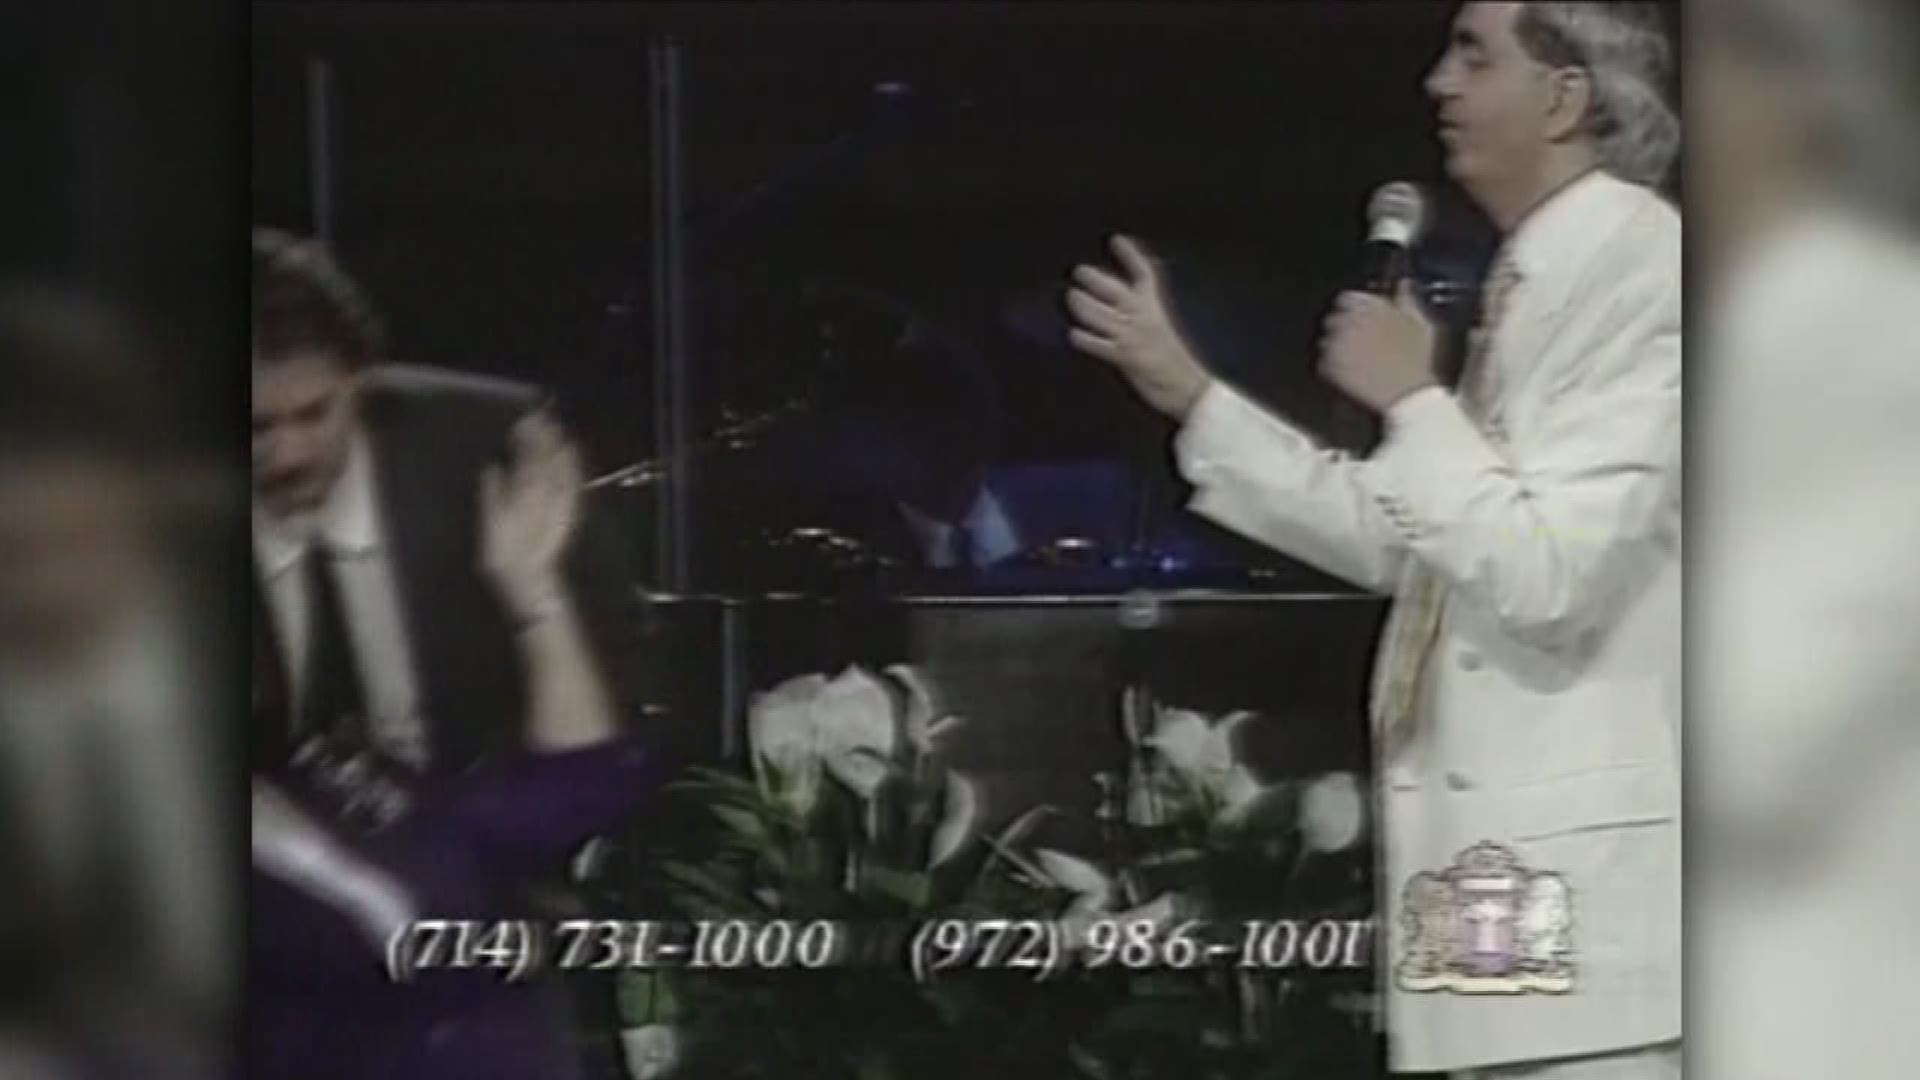 Man 'healed' as child by televangelist Benny Hinn speaks out 